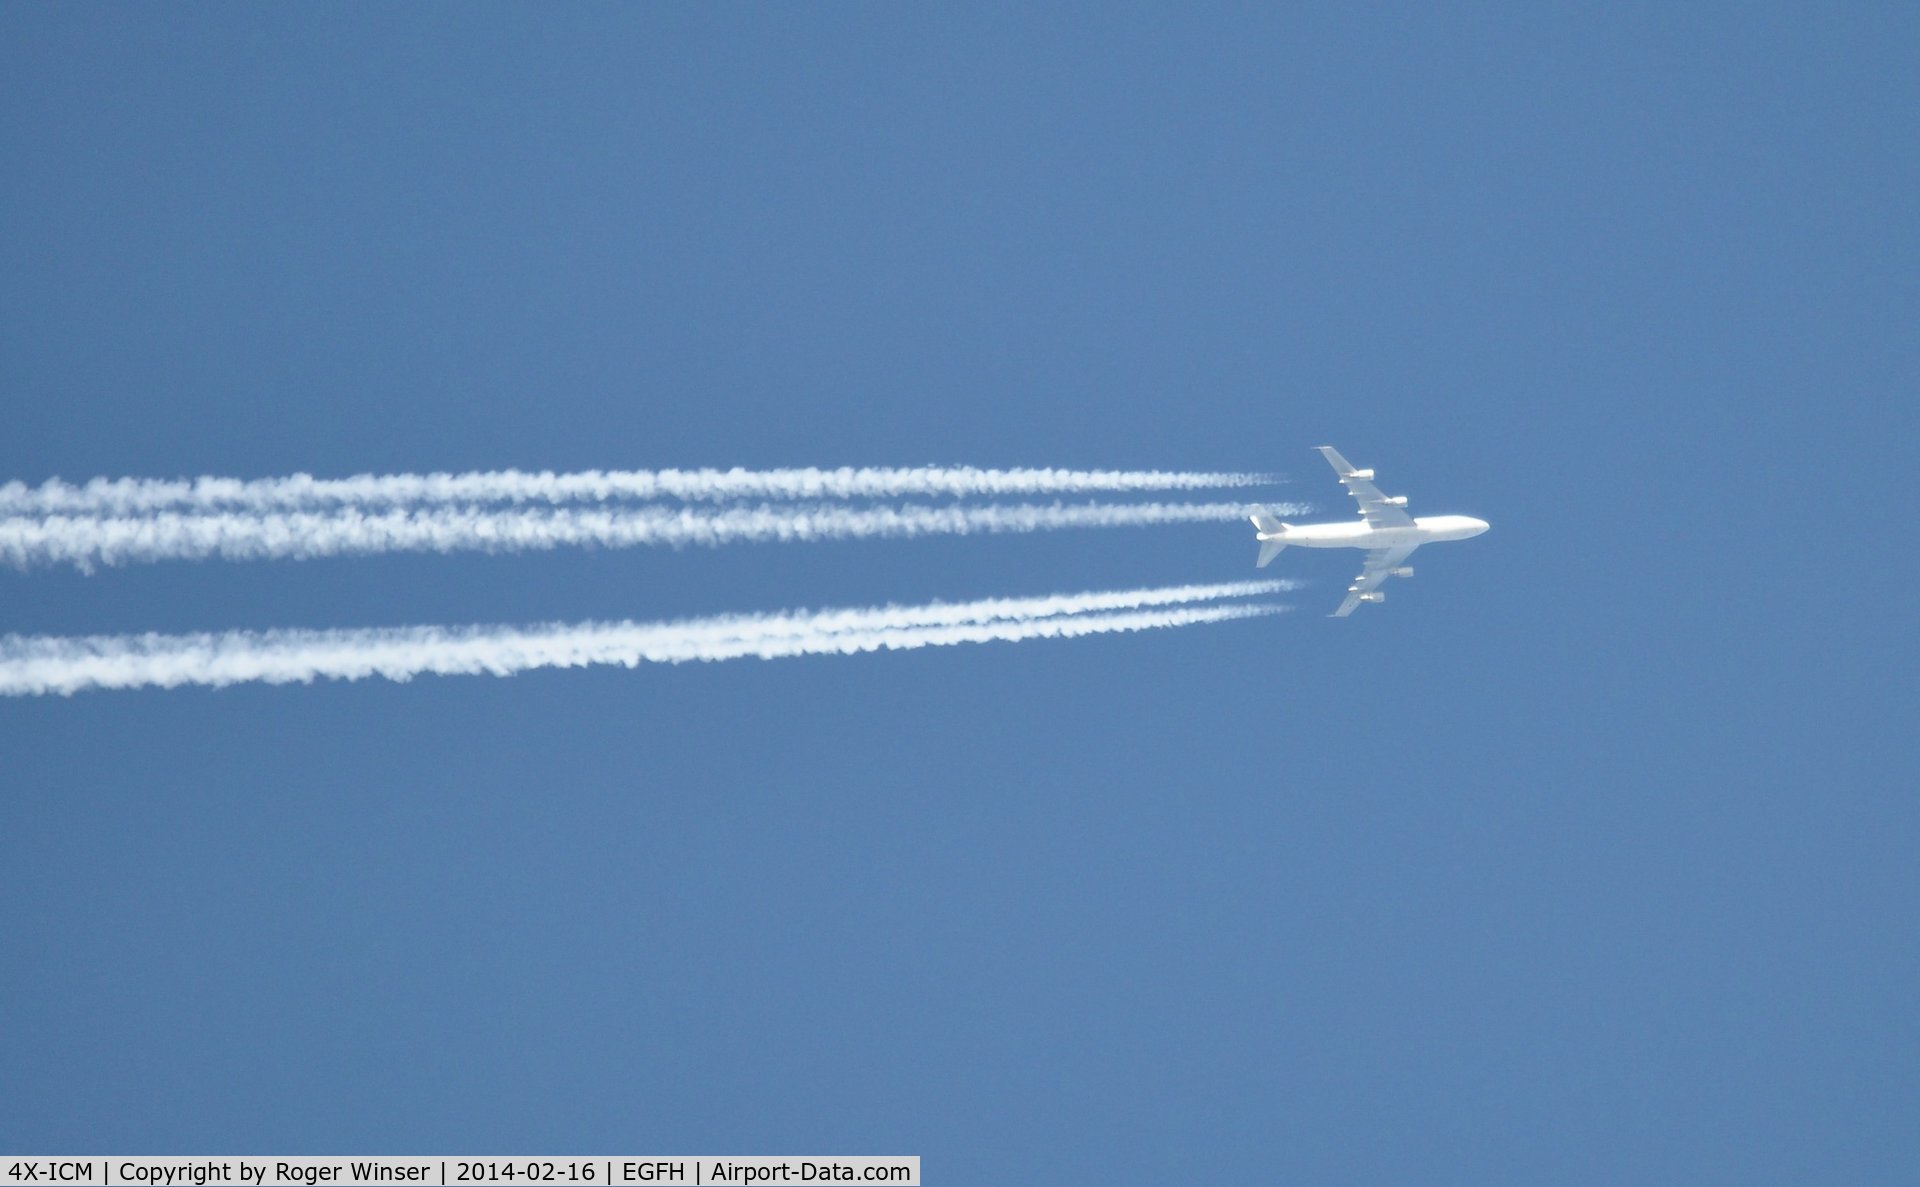 4X-ICM, 1980 Boeing 747-271C C/N 21965, Cargo Air Lines B742C aircraft at 33000 feet east bound over Swansea Airport.